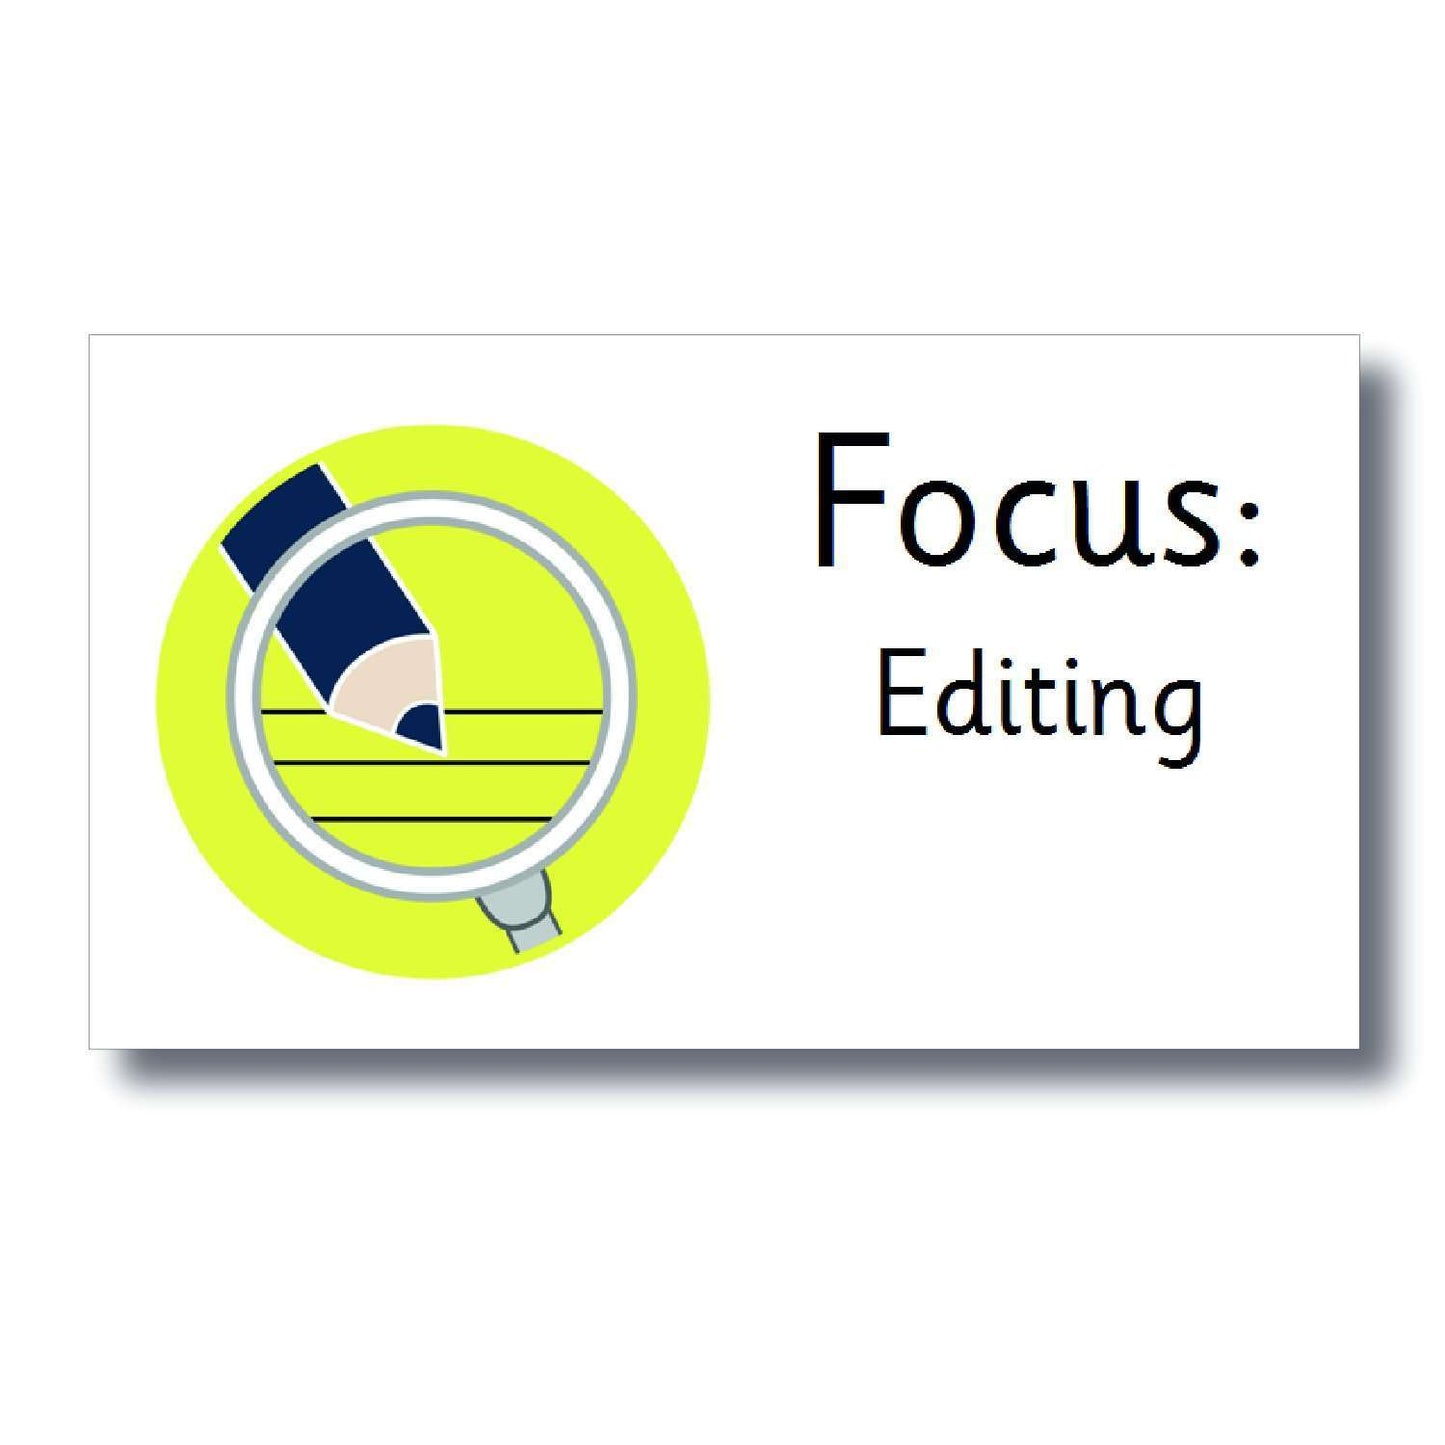 Focus Marking Stickers - Editing:Primary Classroom Resources